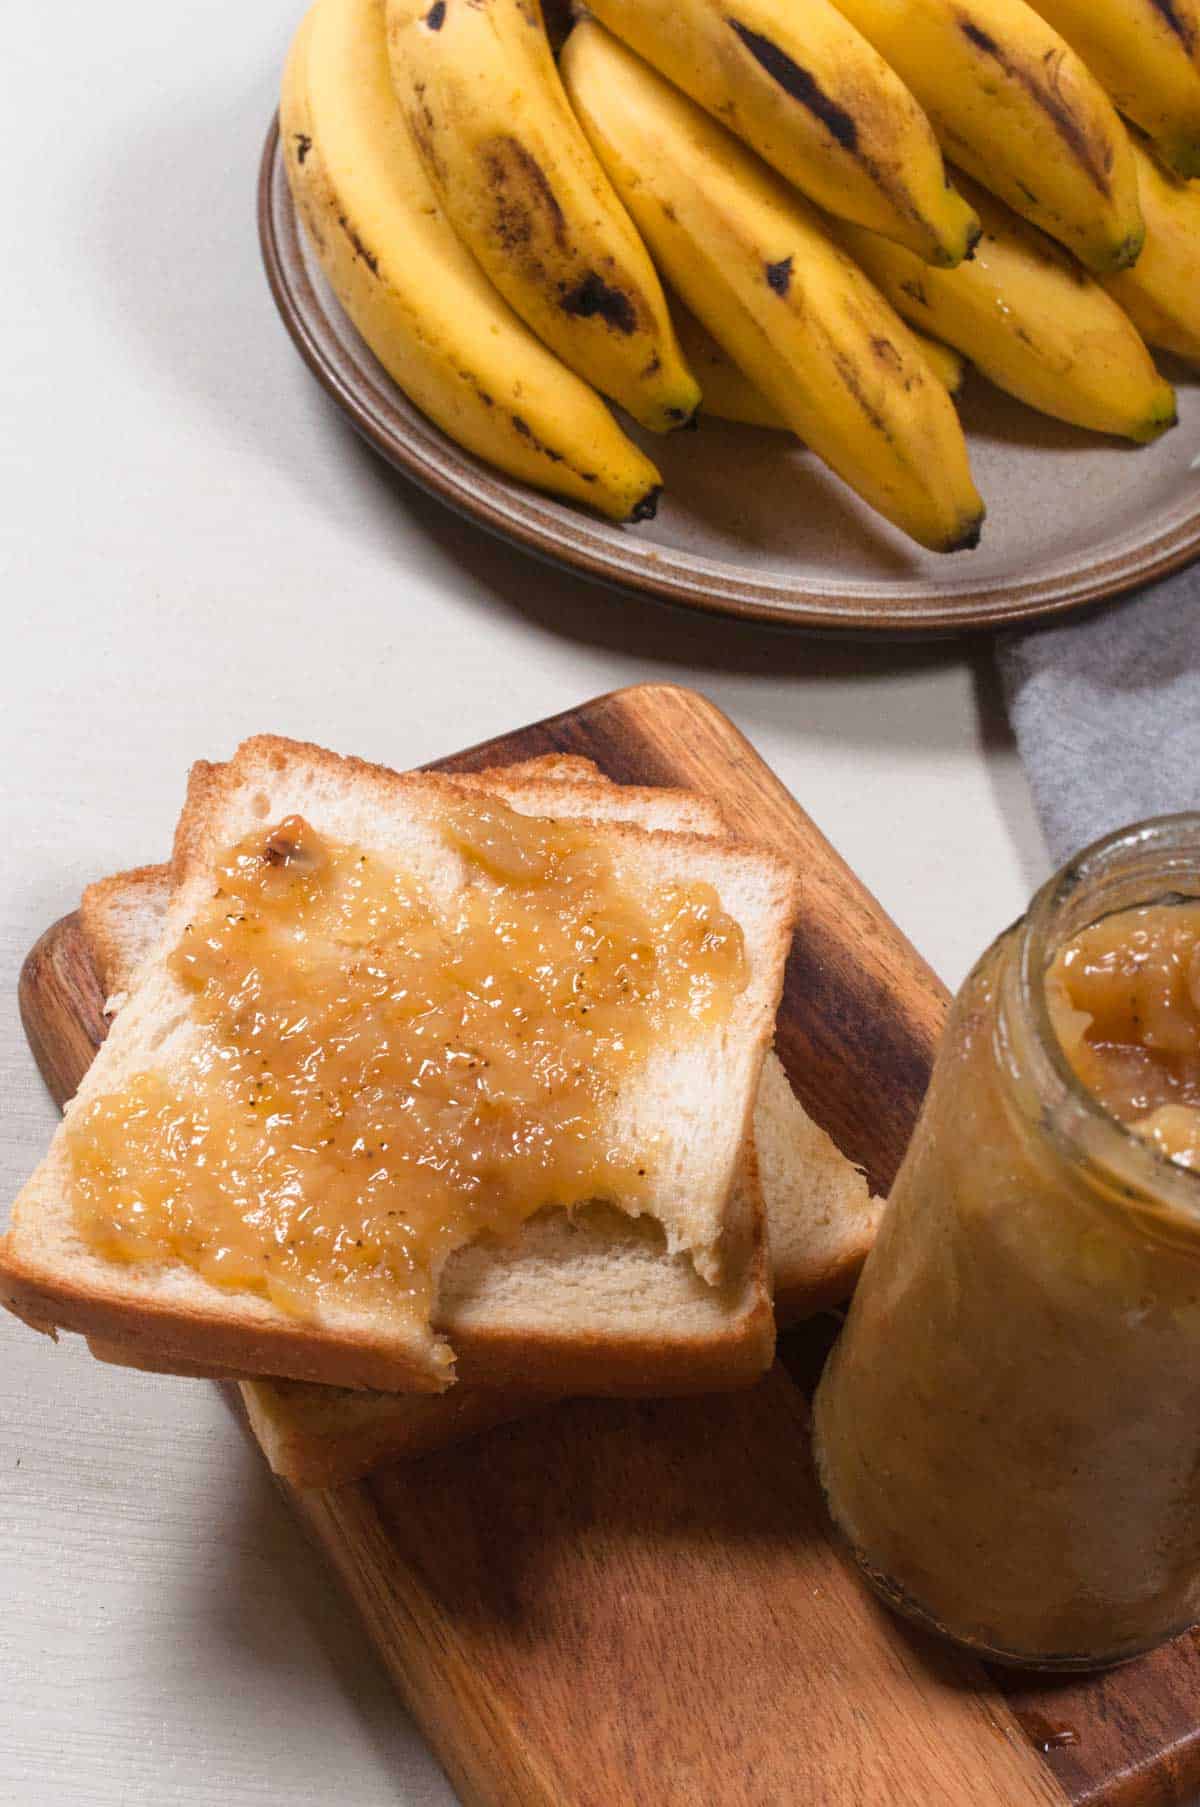 Banana jam on a slice of toasted bread.